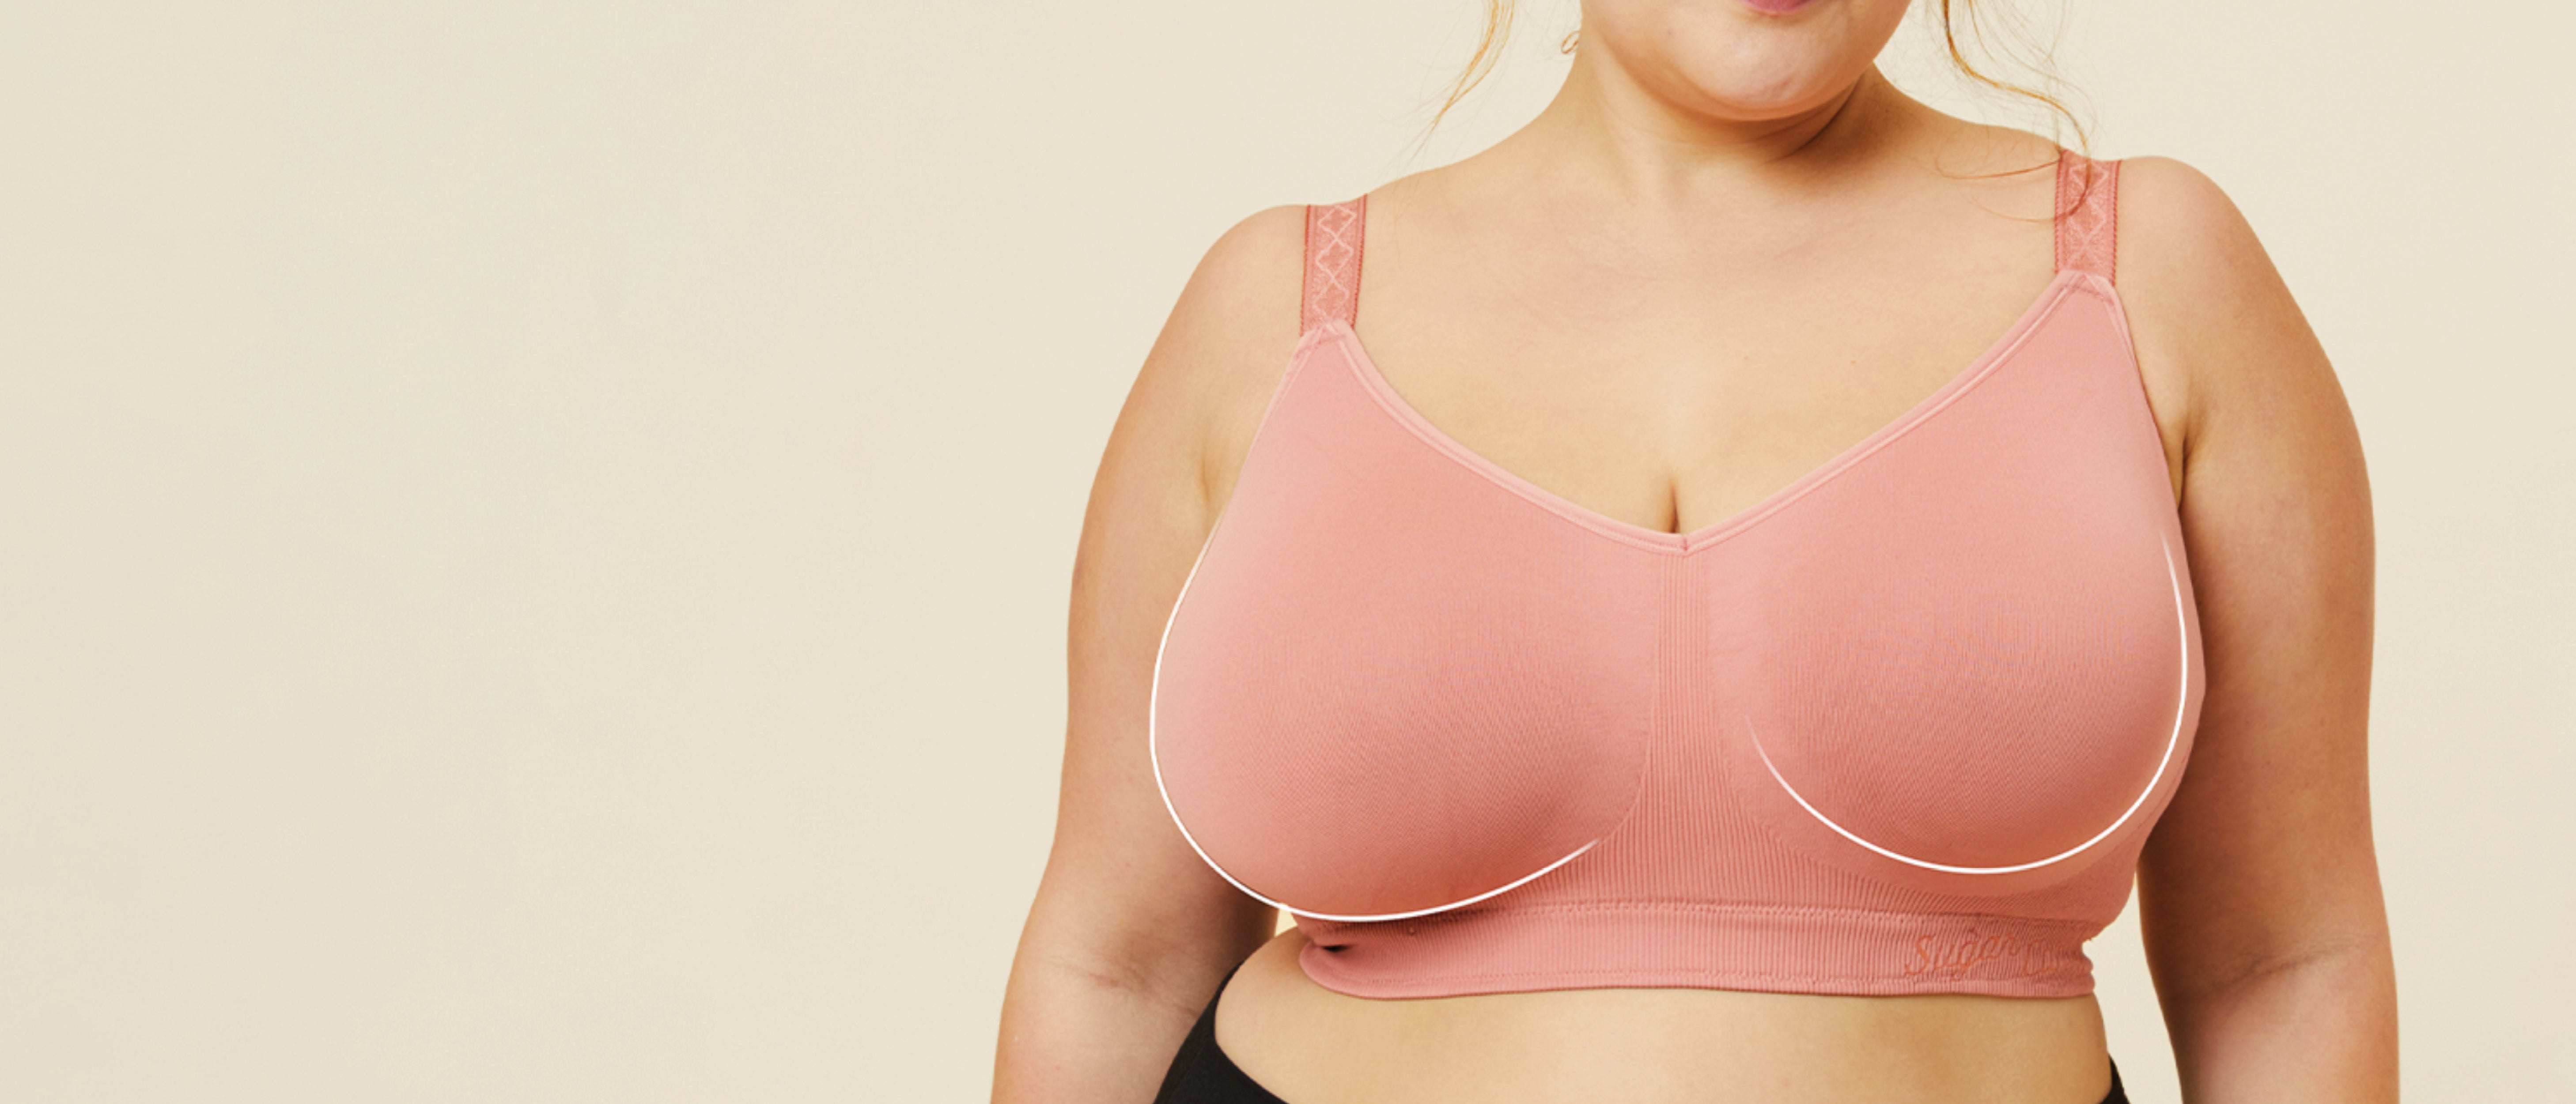 Sugar Candy Bra on X: Discover UPLIFT Any fuller busted gal who's been let  down by wireless bras knows that true comfort is about more than just  ditching the underwire. That's why